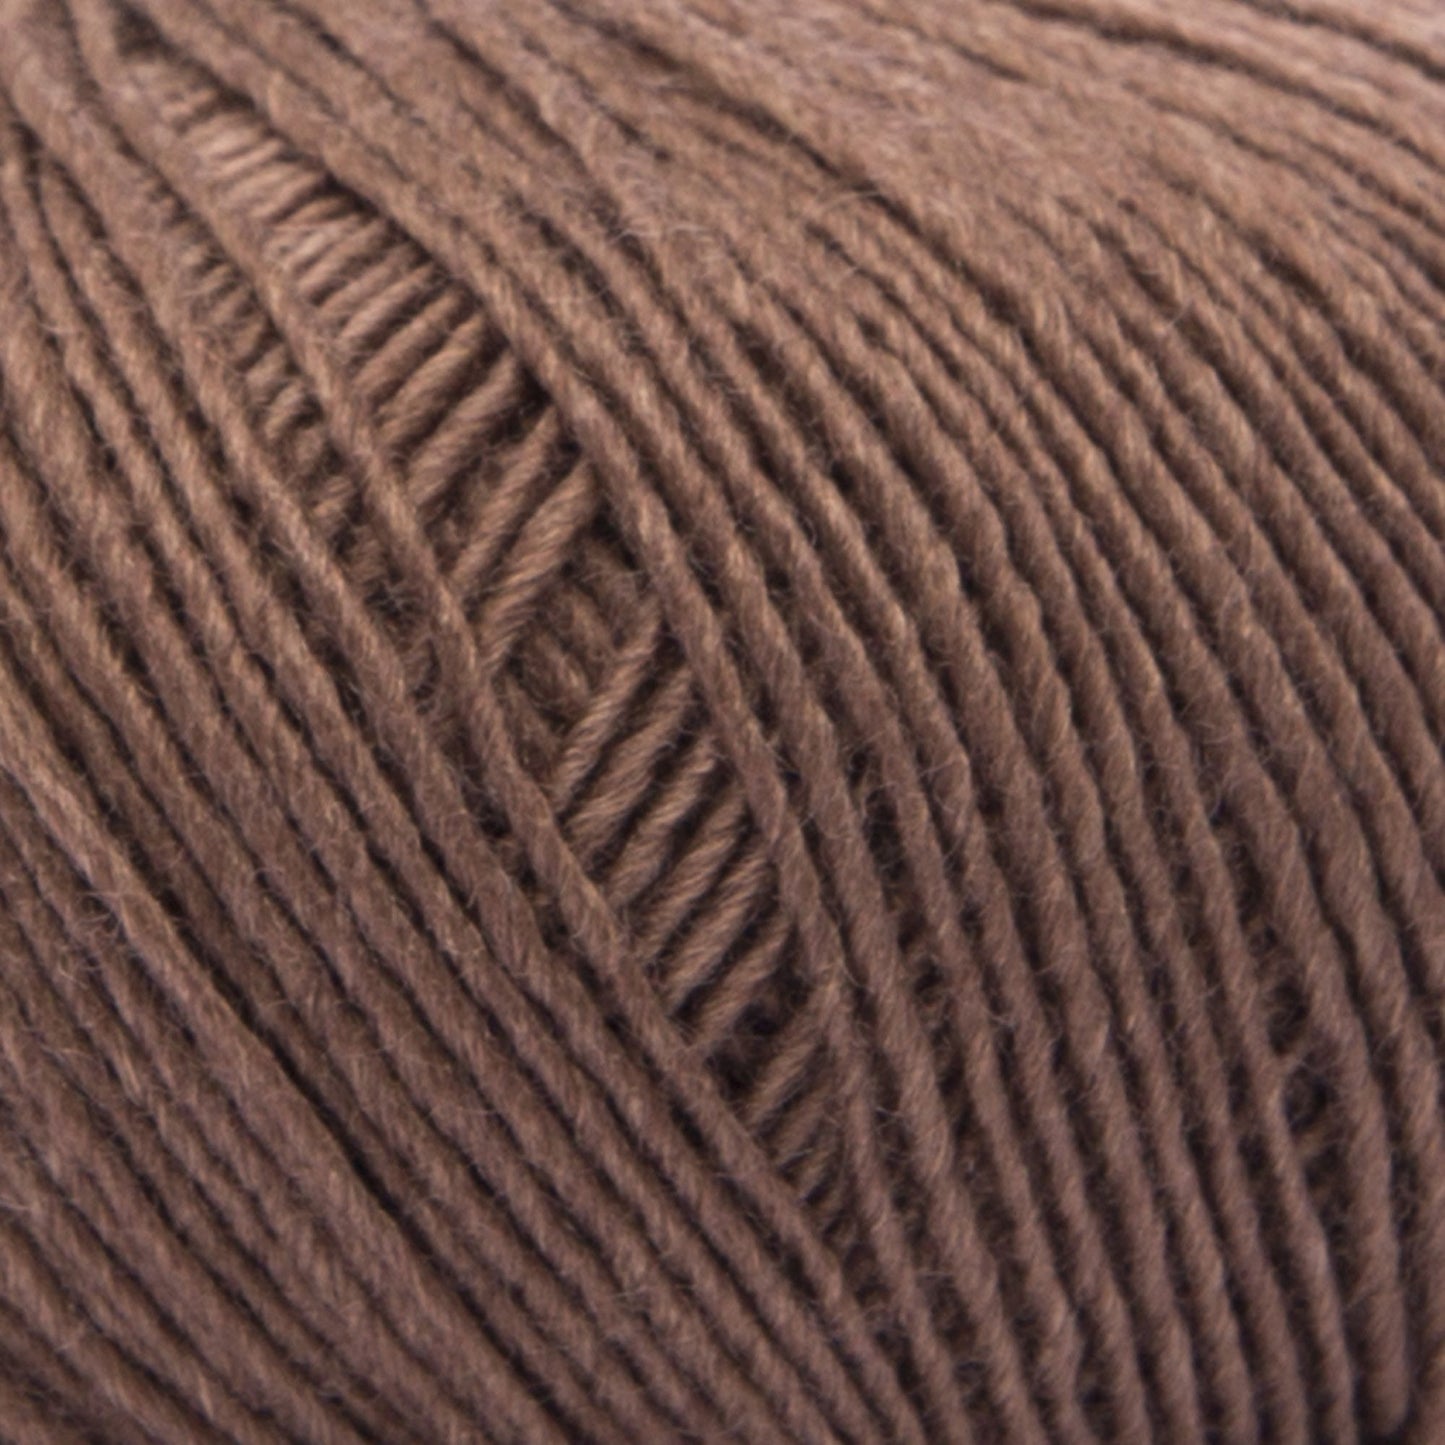 ggh Lacy | Set of 4 x 25g (total 100g) - 018 - Brown